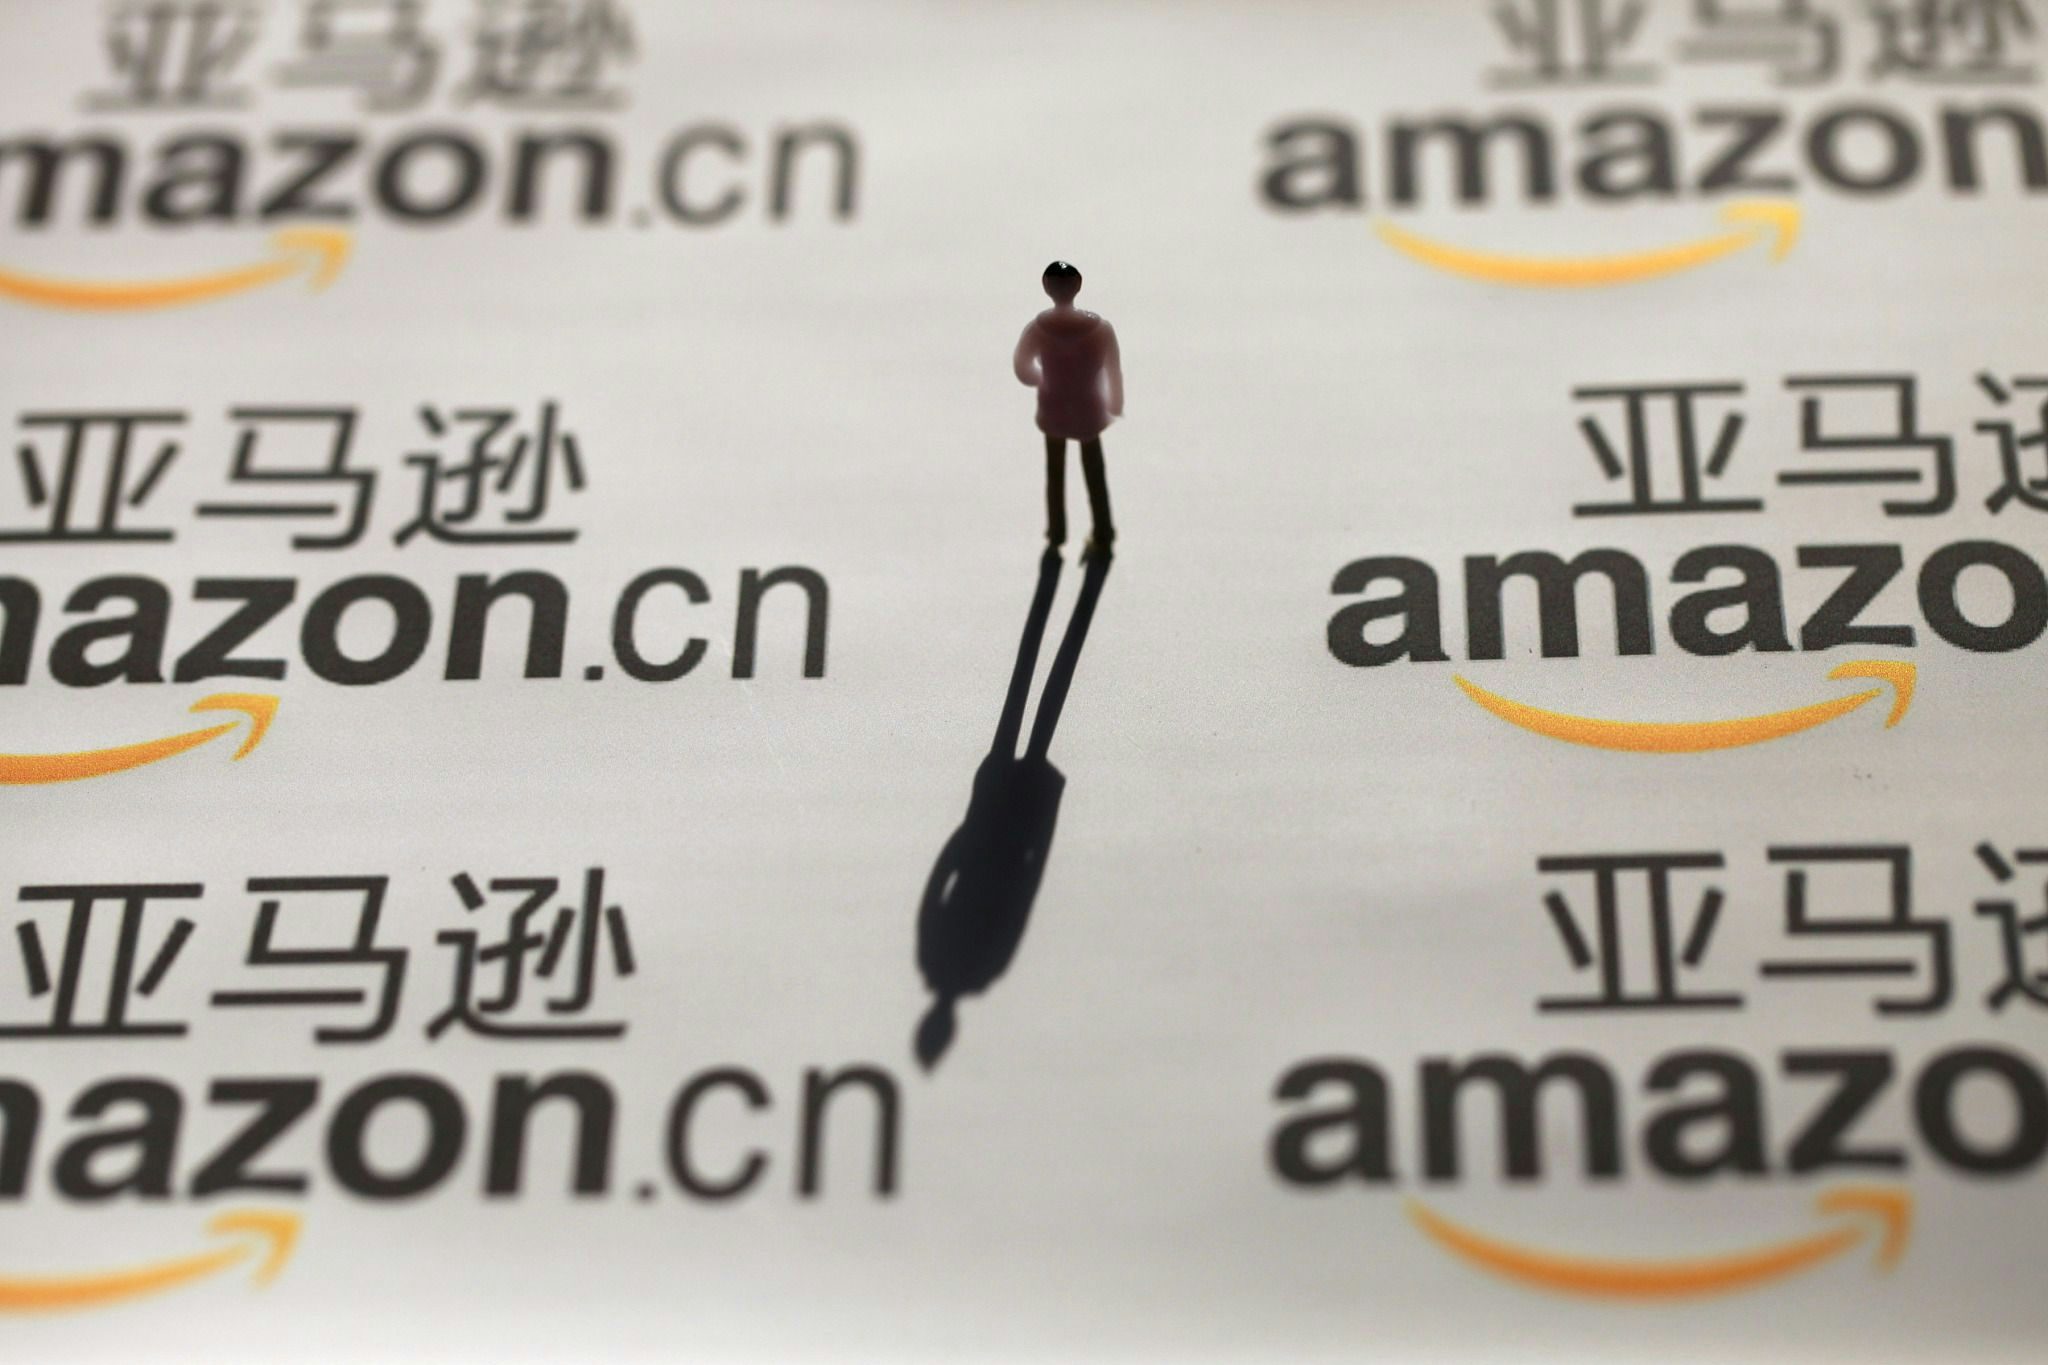 Amazon Enters E-Commerce Battle by Introducing Shopping Festival in China